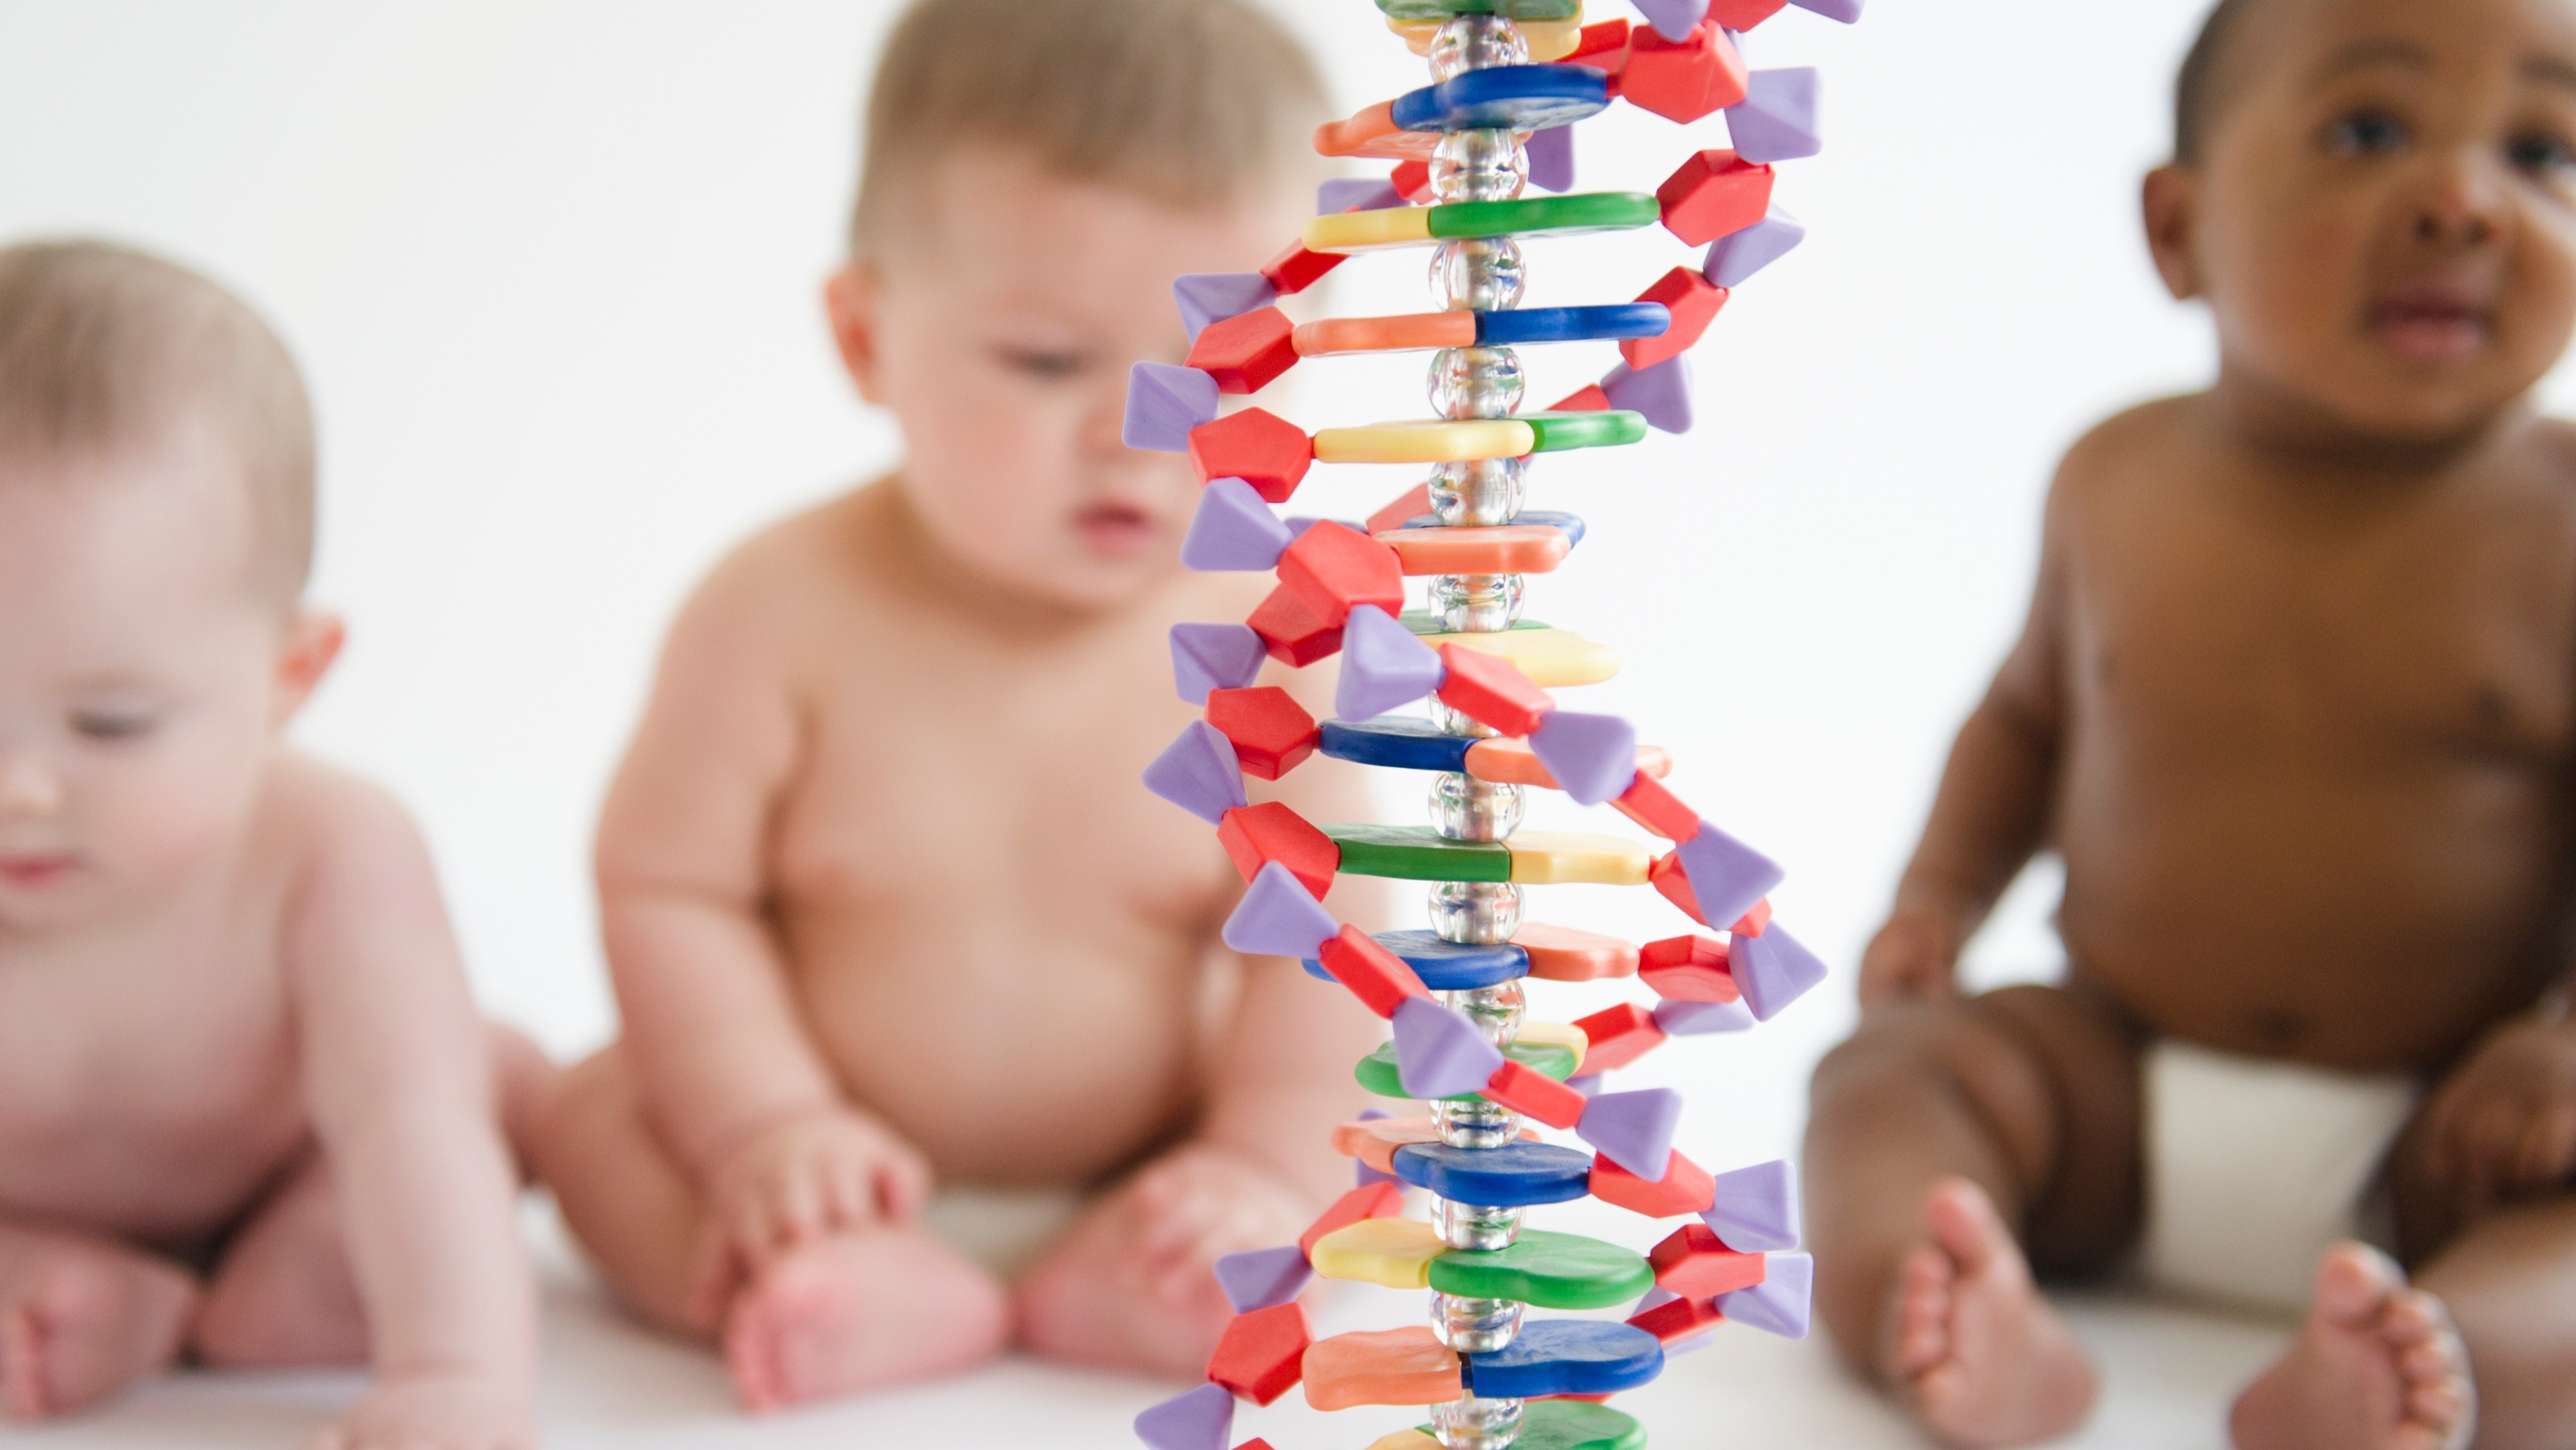 Babies and DNA